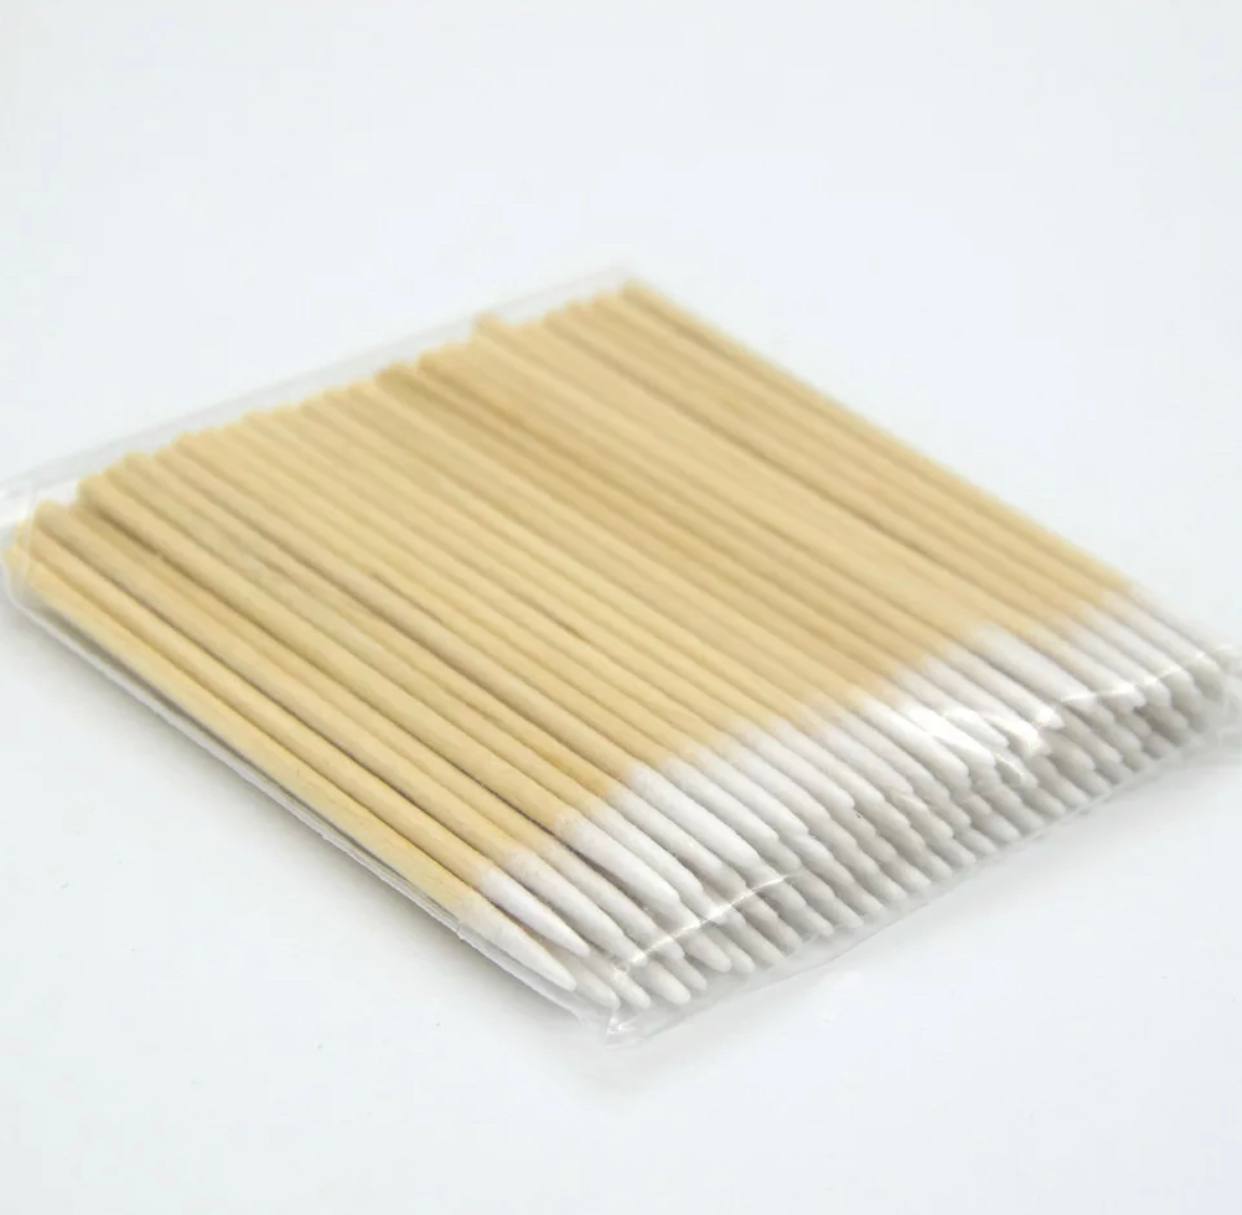 Wood Cotton Swab for cuts